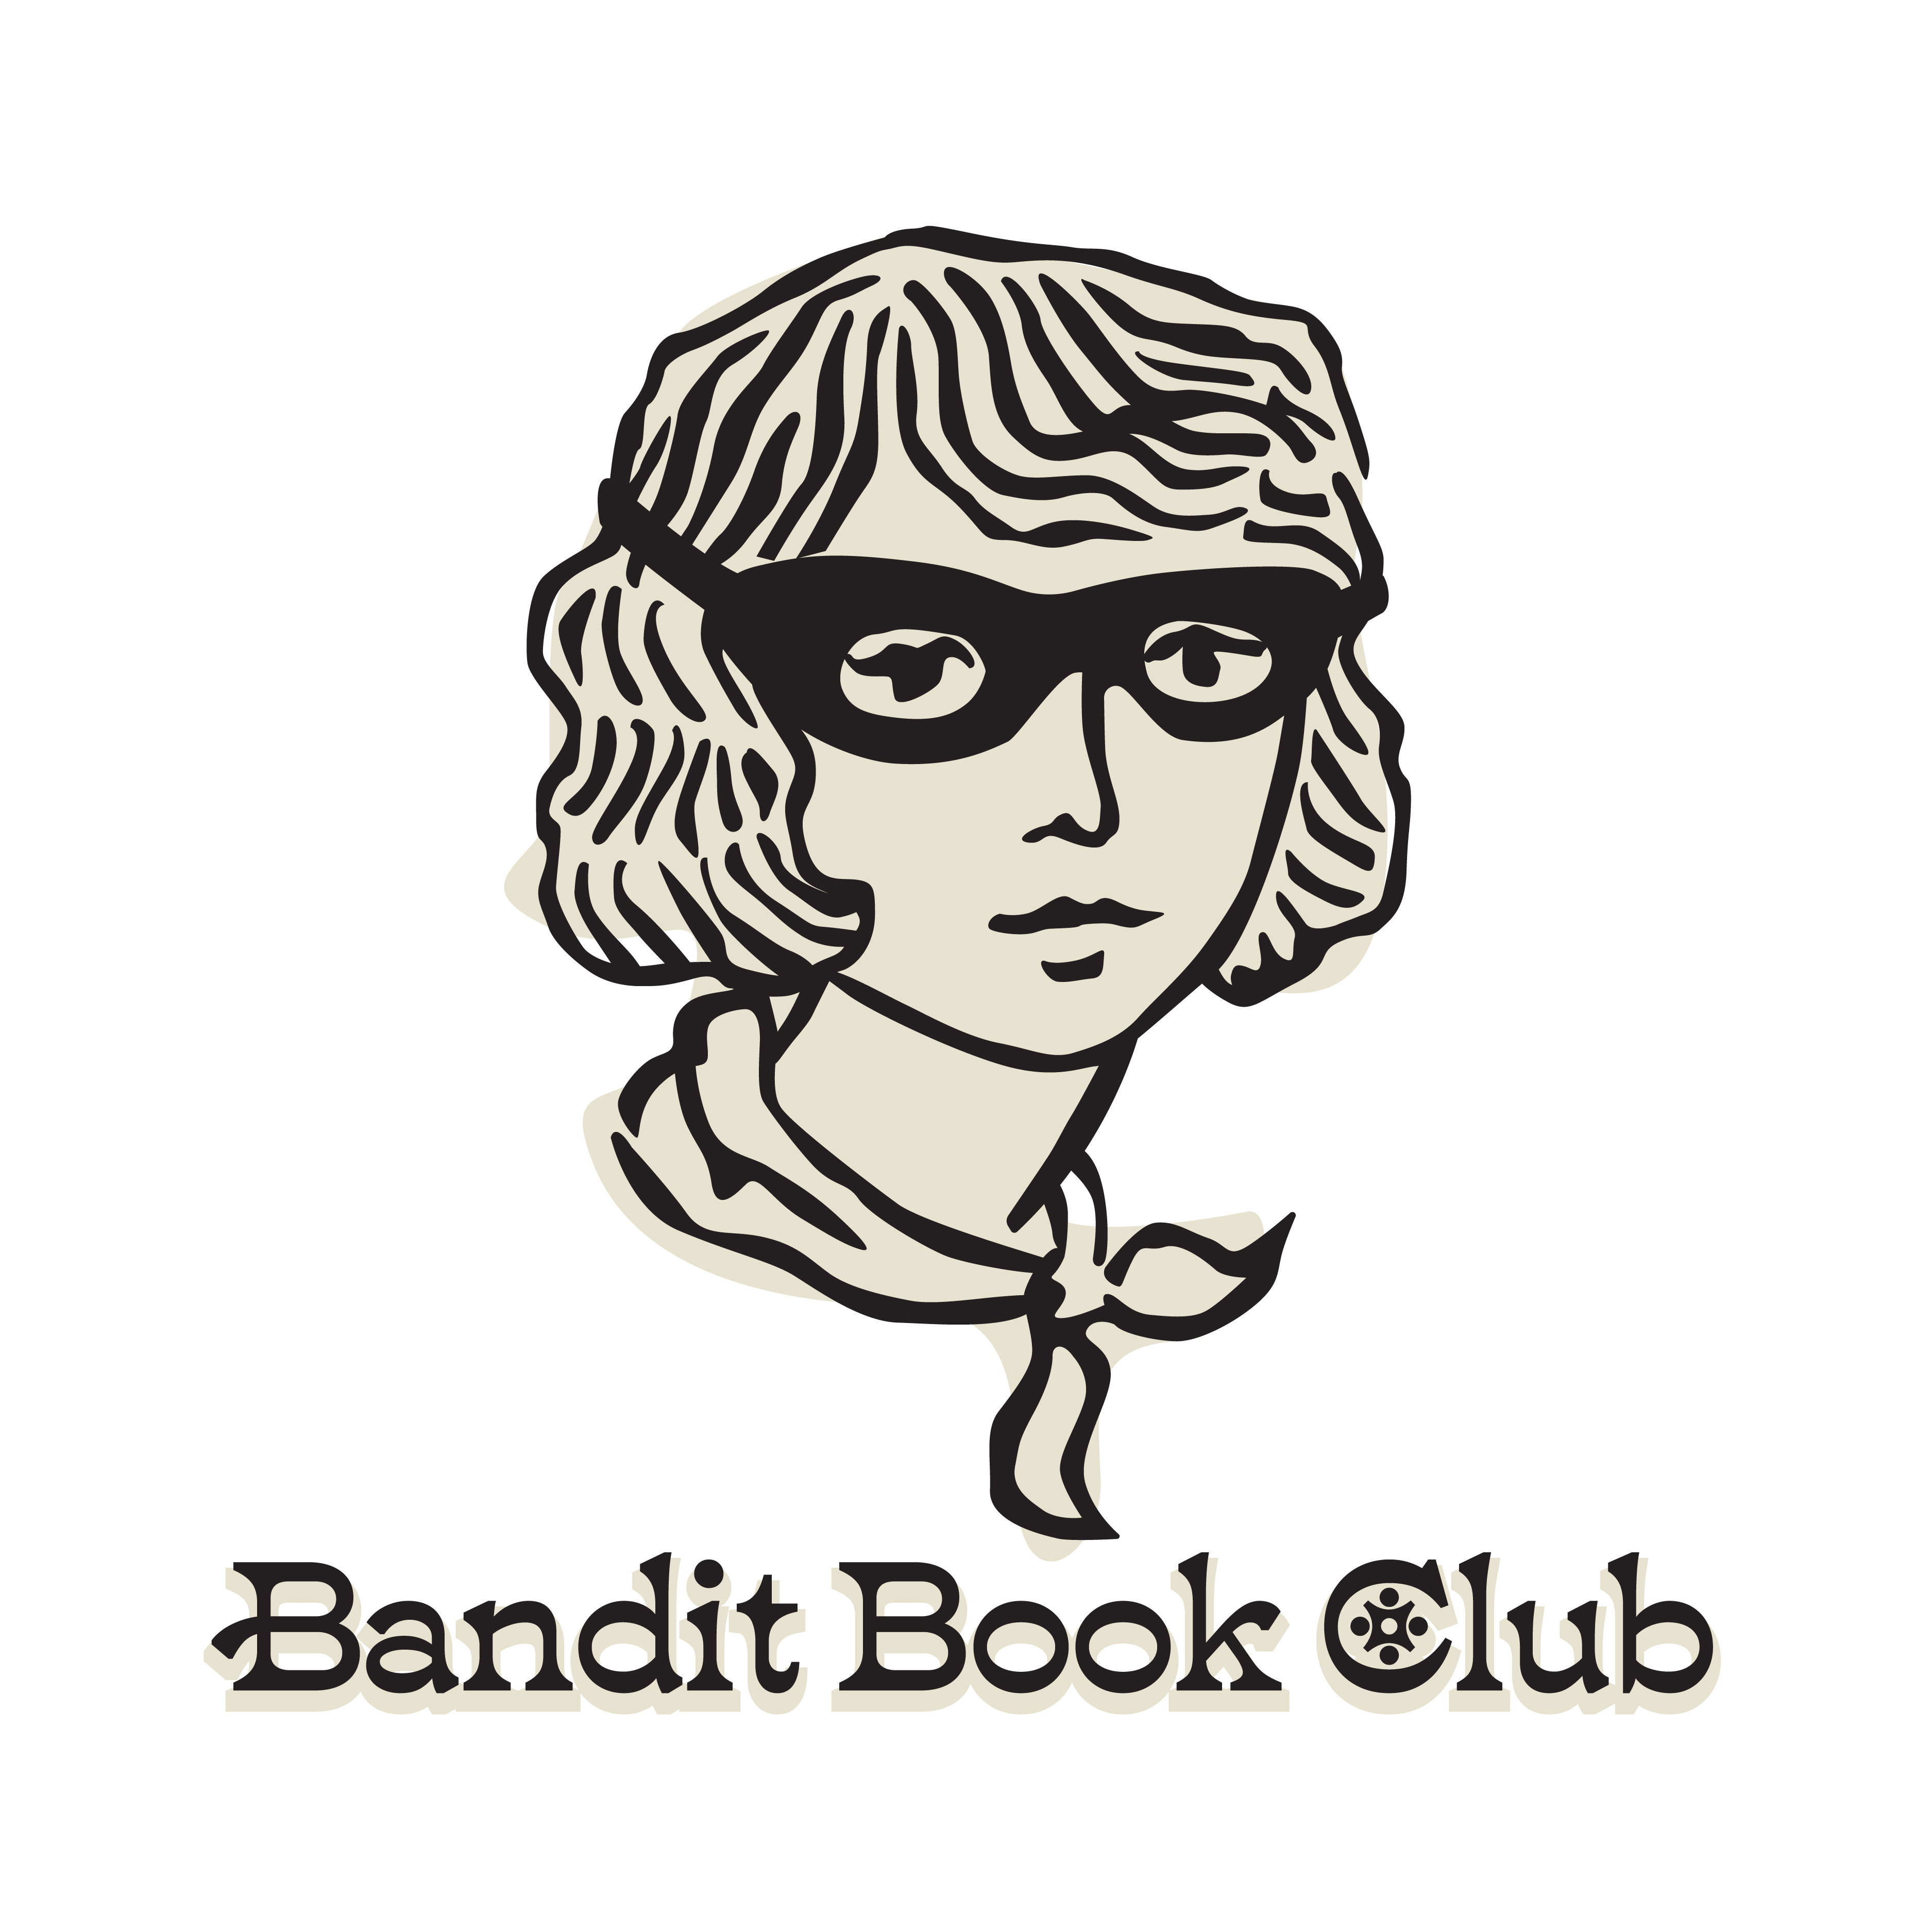 Bandit Book Club logo design by logo designer Caribou Creative for your inspiration and for the worlds largest logo competition